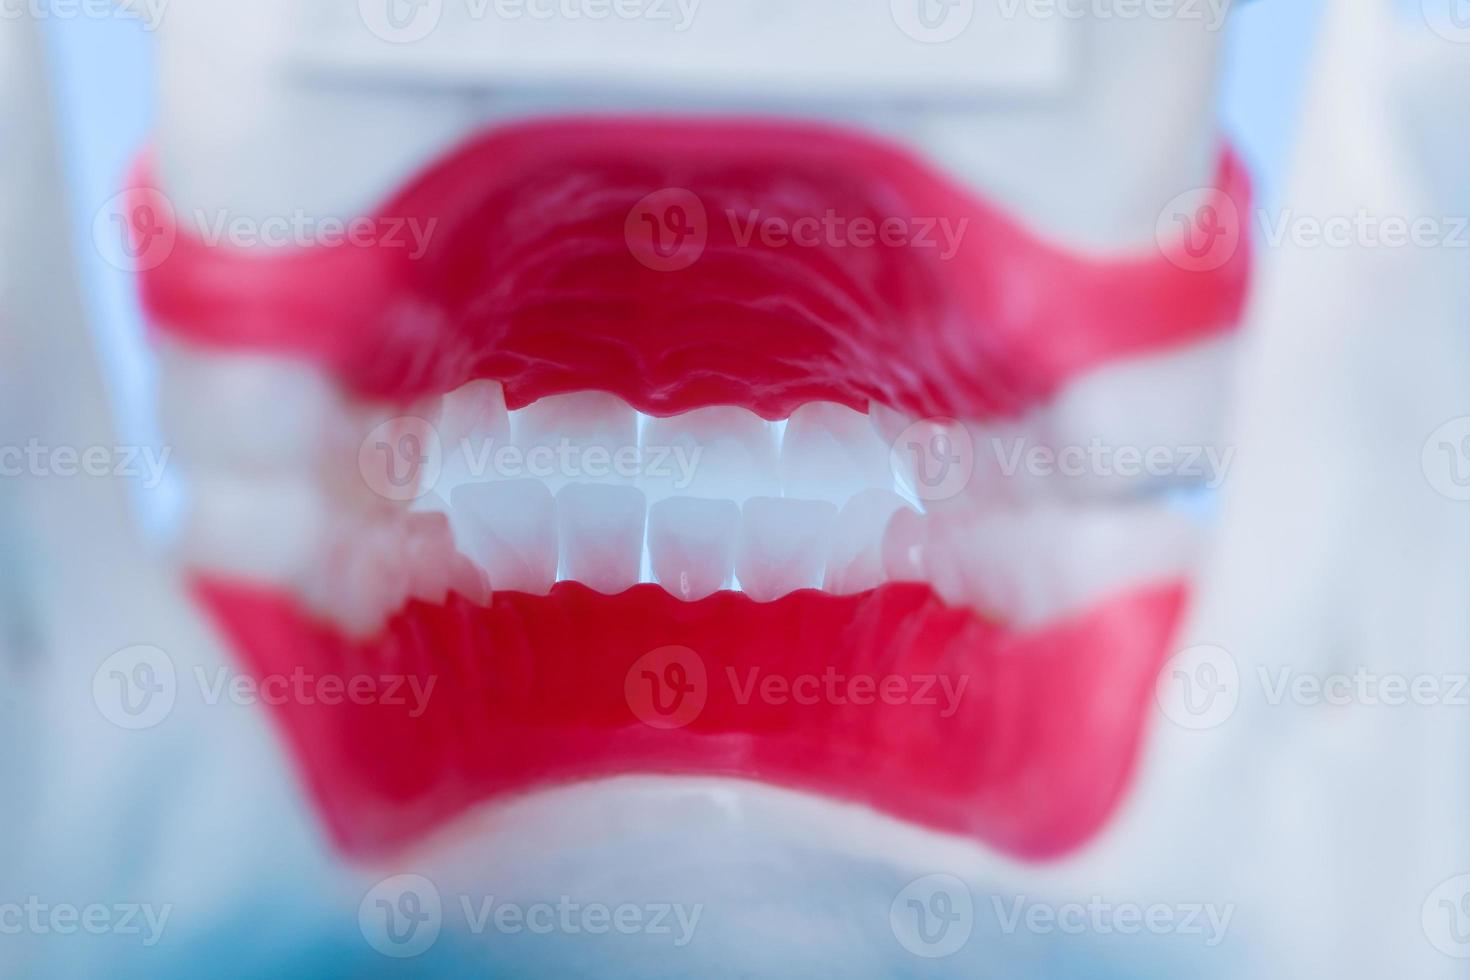 inside view of human jaw with teeth and gums anatomy model photo